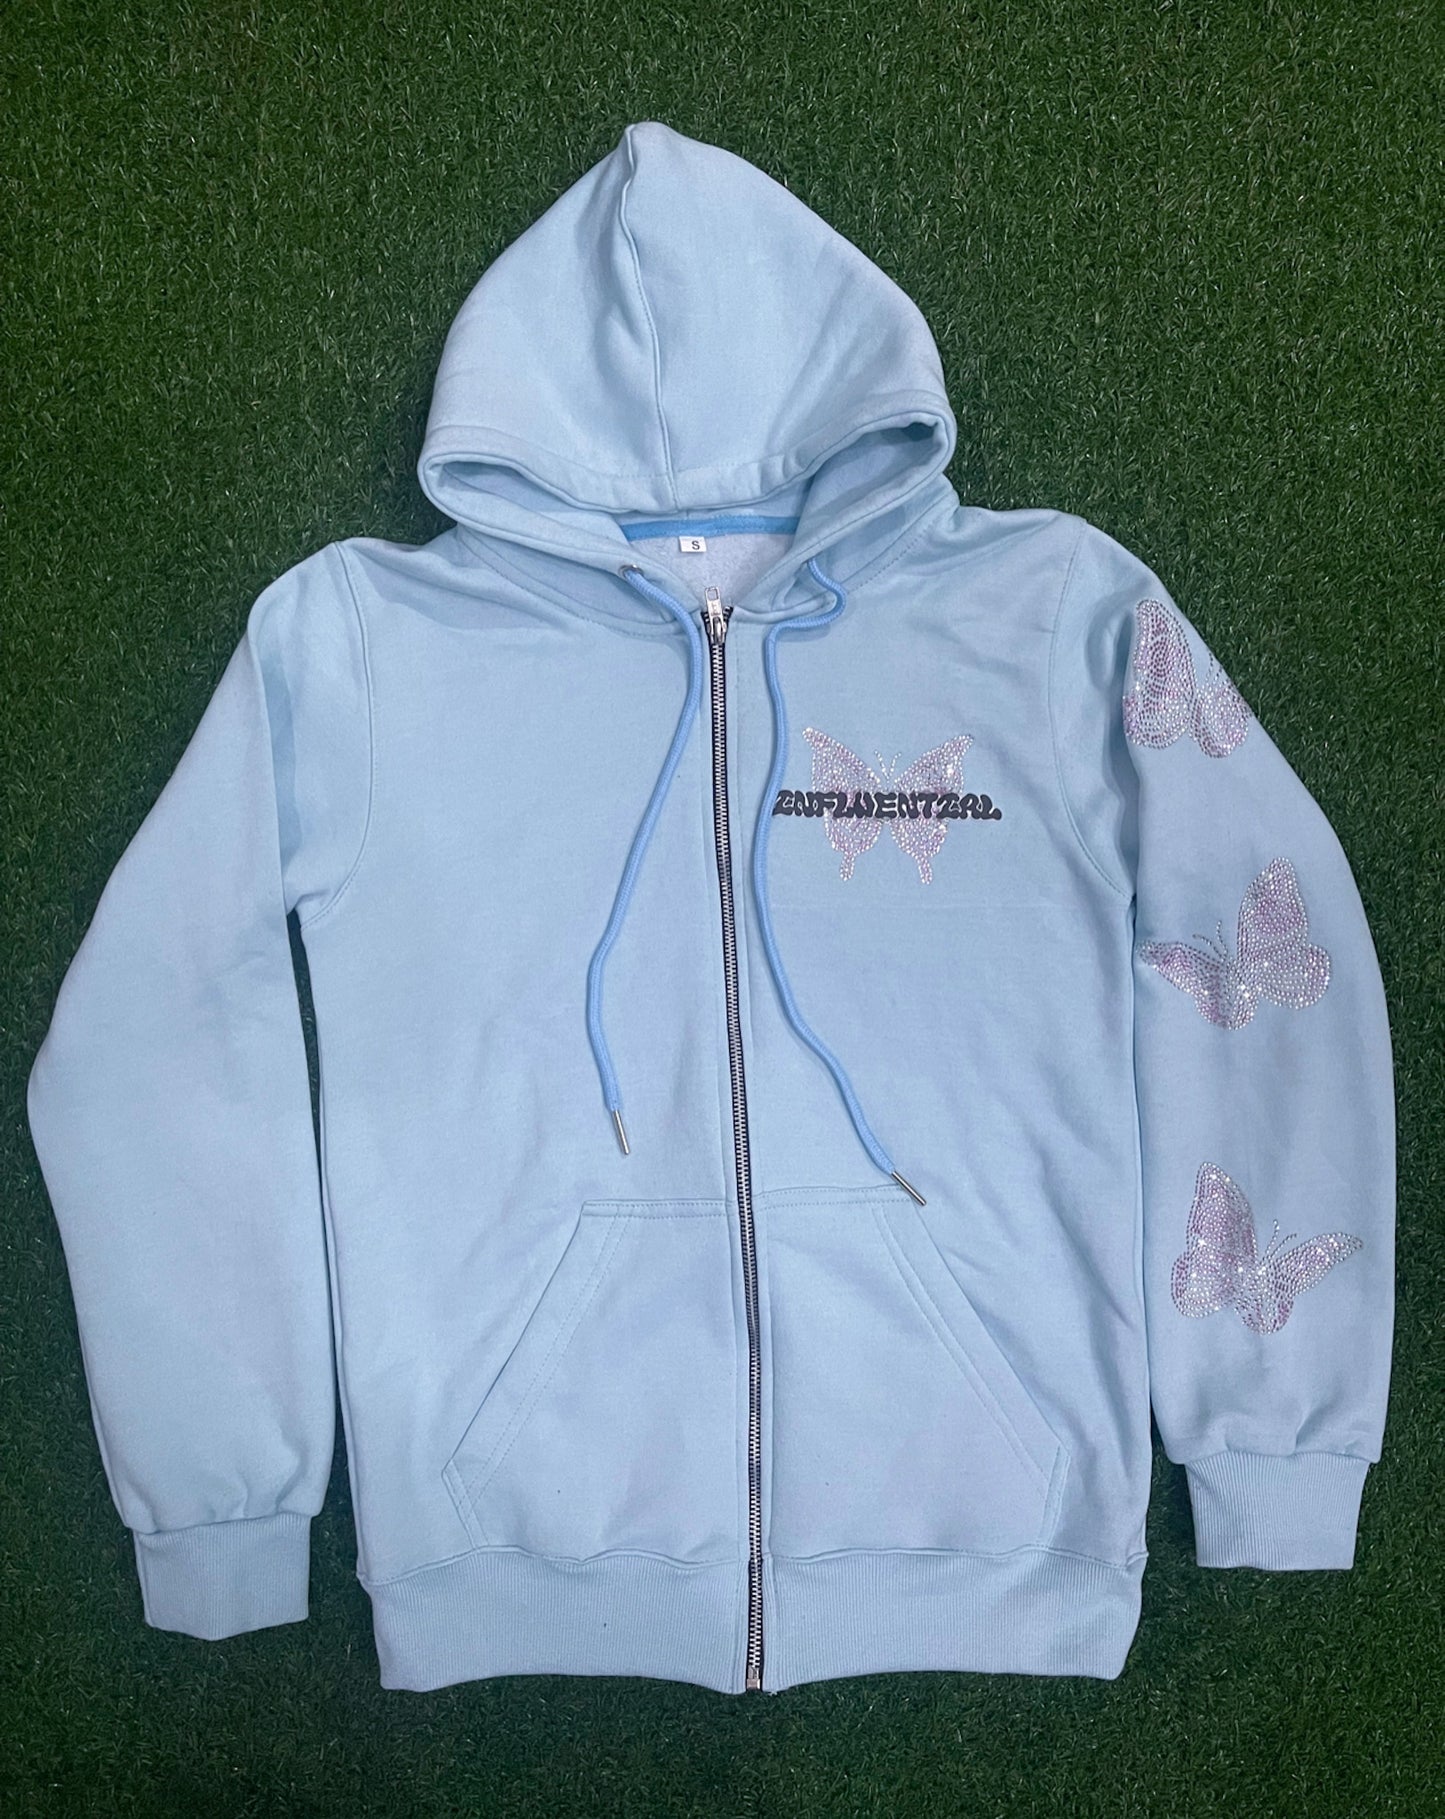 INFLUENTIAL “FAR FROM THE USUAL” BABY BLUE/PINK ZIP-UP